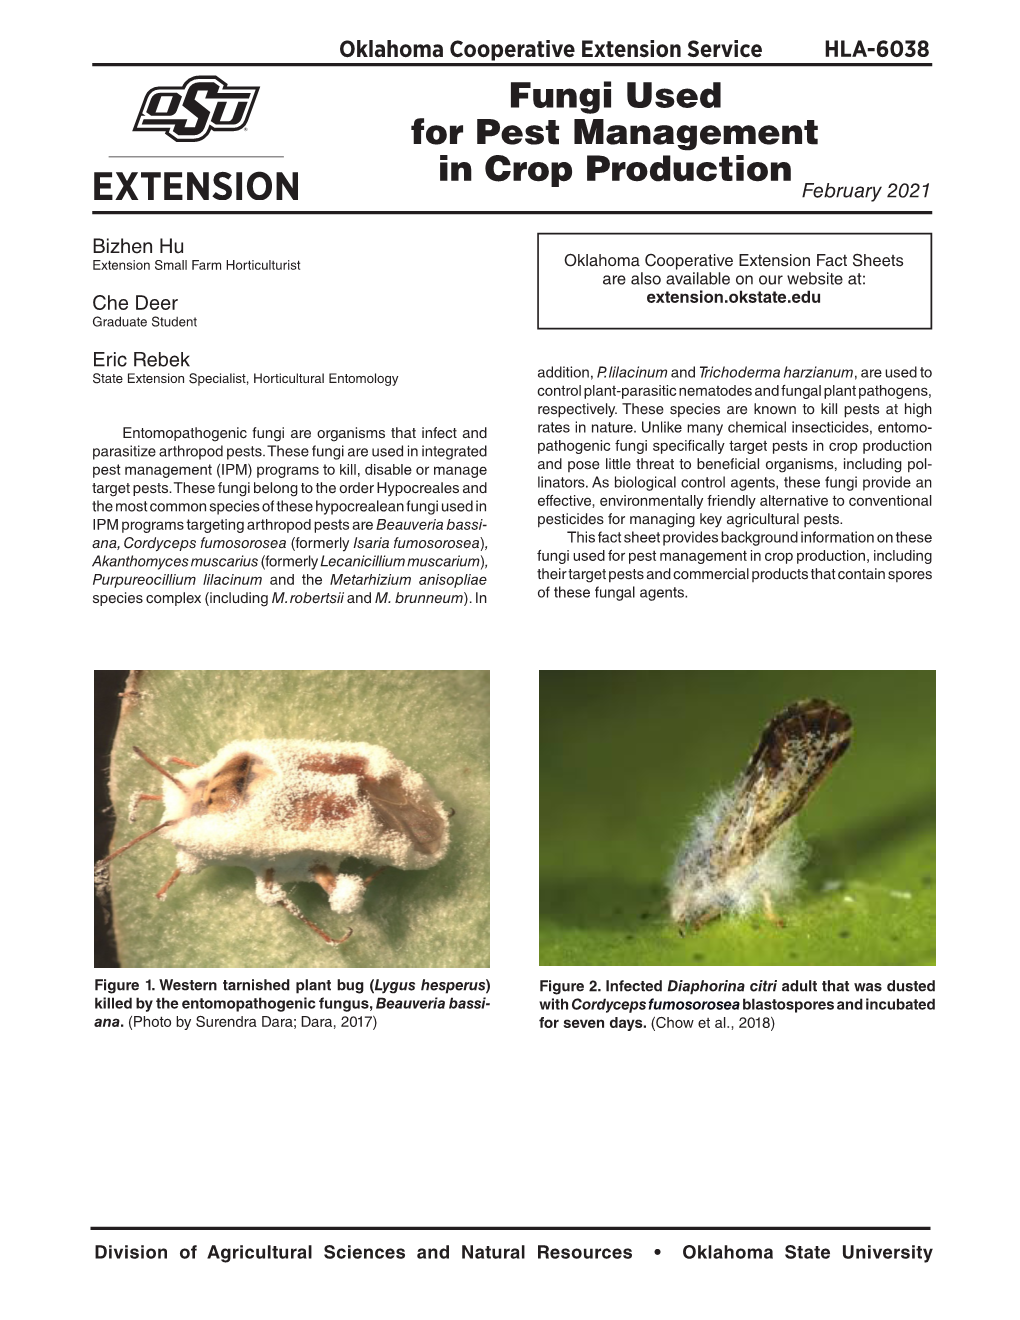 Fungi Used for Pest Management in Crop Production February 2021